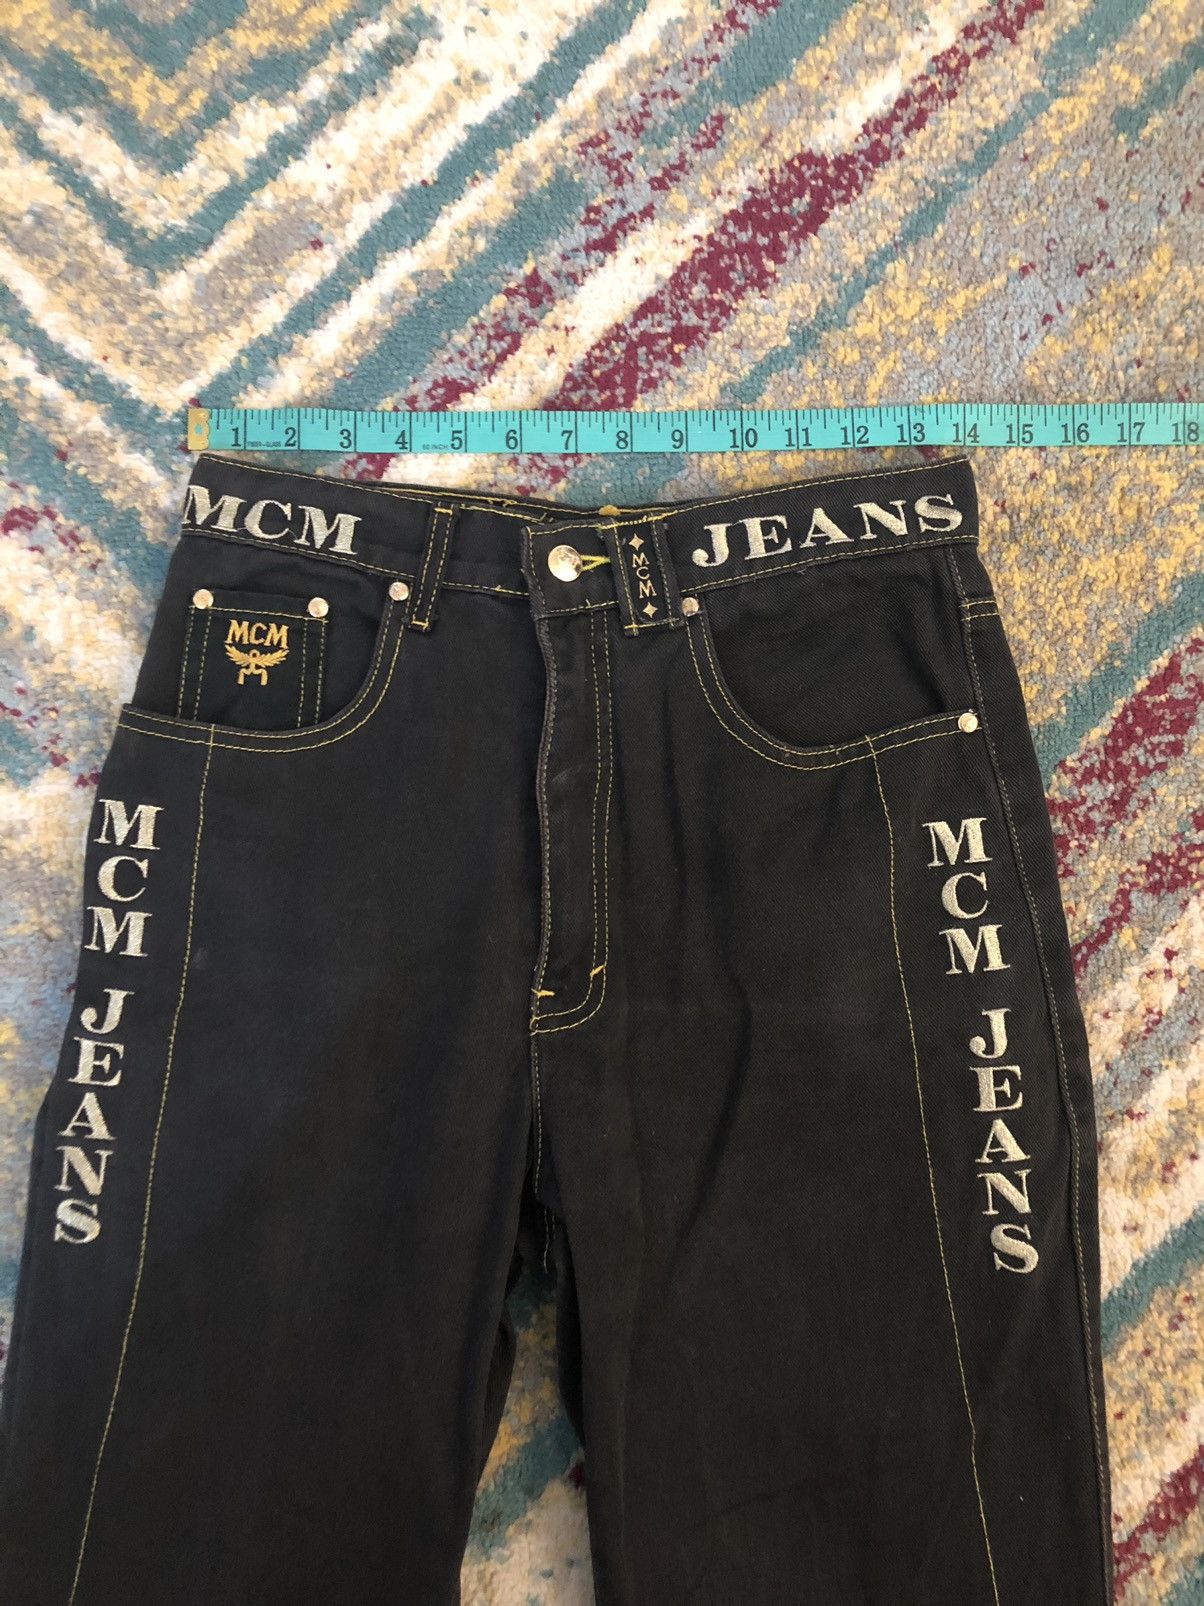 Vintage MCM Jeans Made Italy - 6